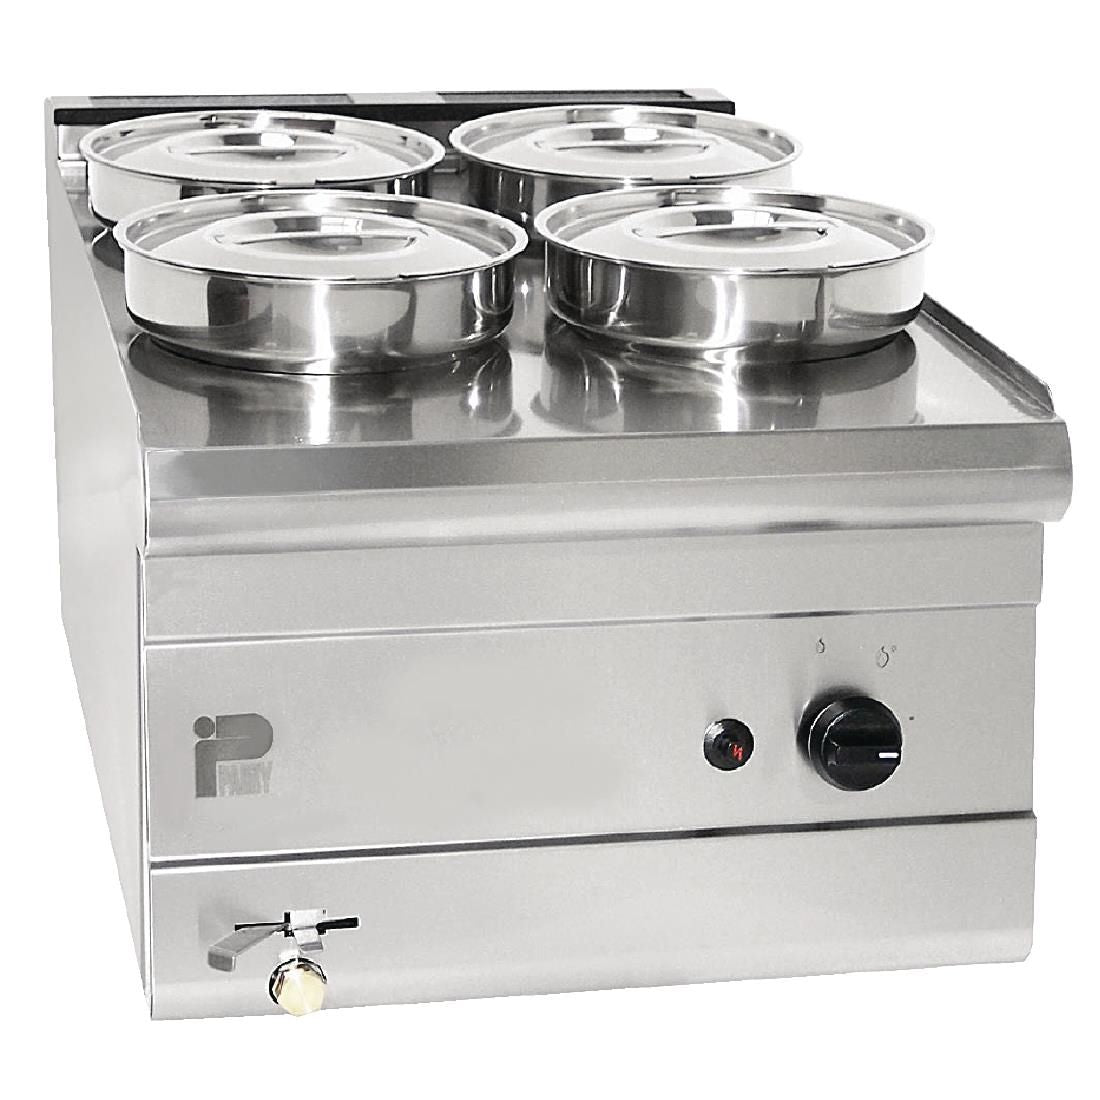 Parry Electric Bain Marie NPWB4